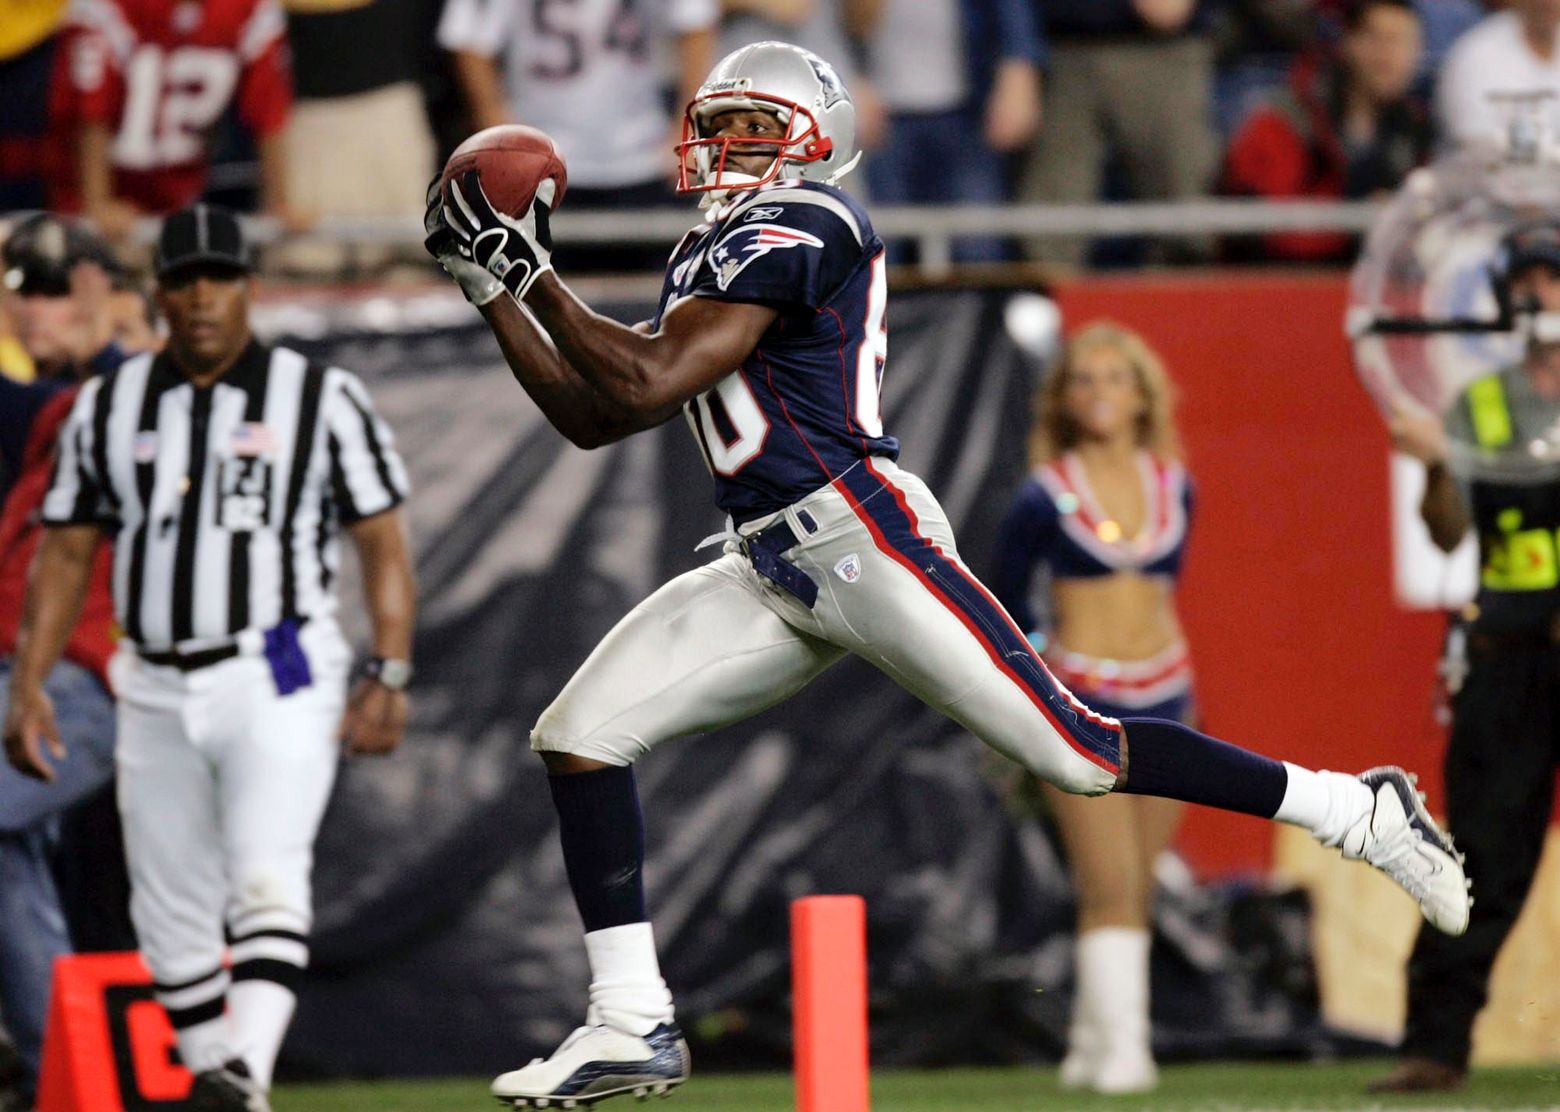 Troy Brown continues to help coach Patriots receivers - The Boston Globe